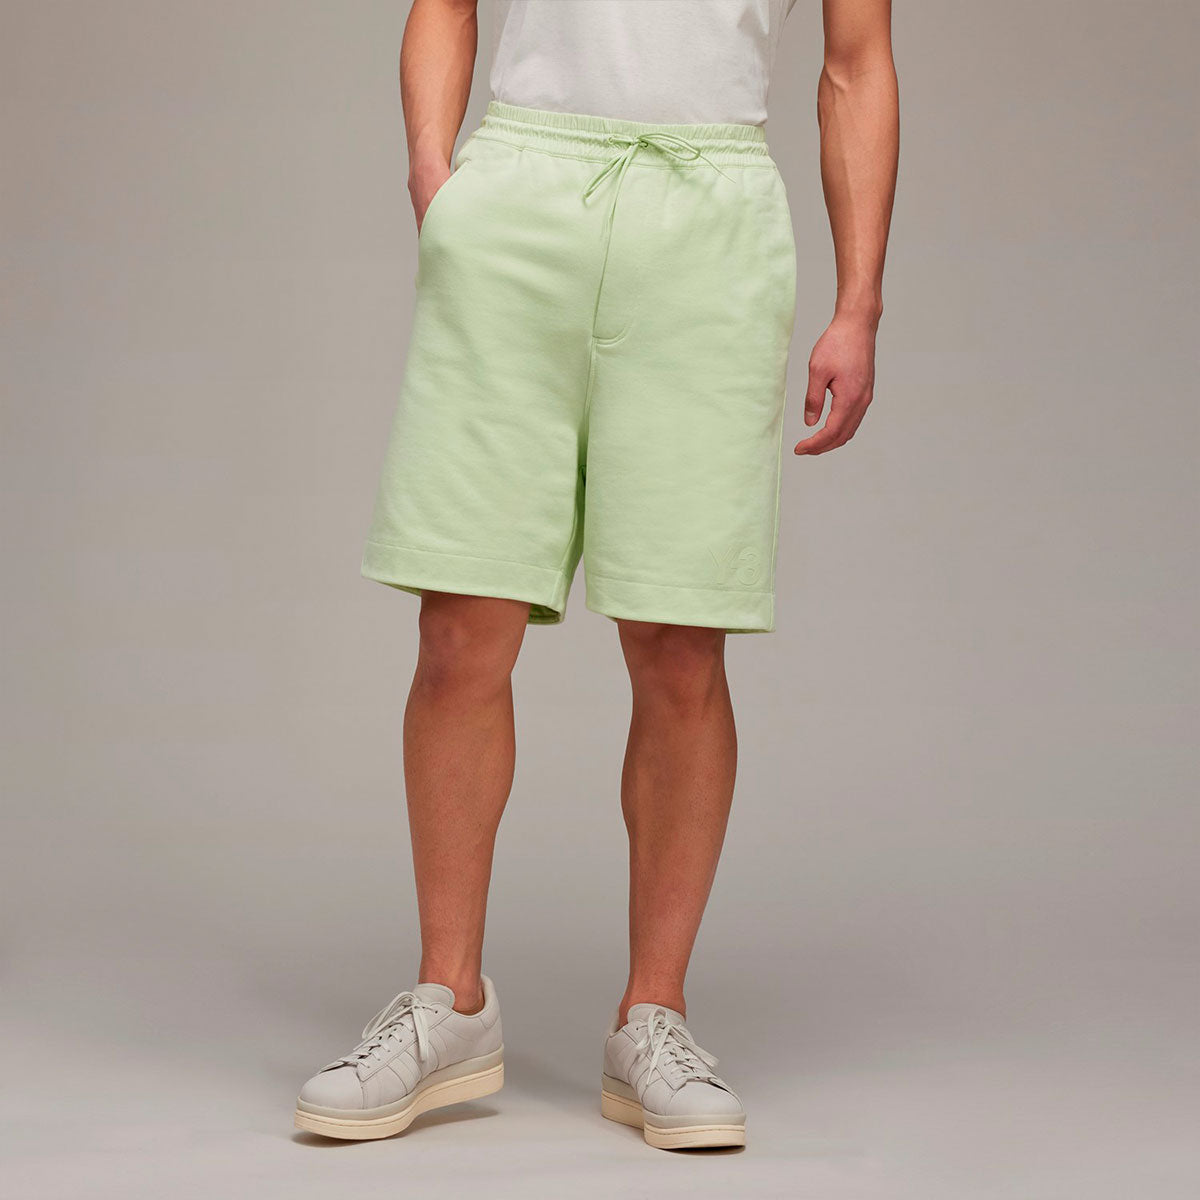 M CLASSIC TERRY SHORTS - Why are you here?